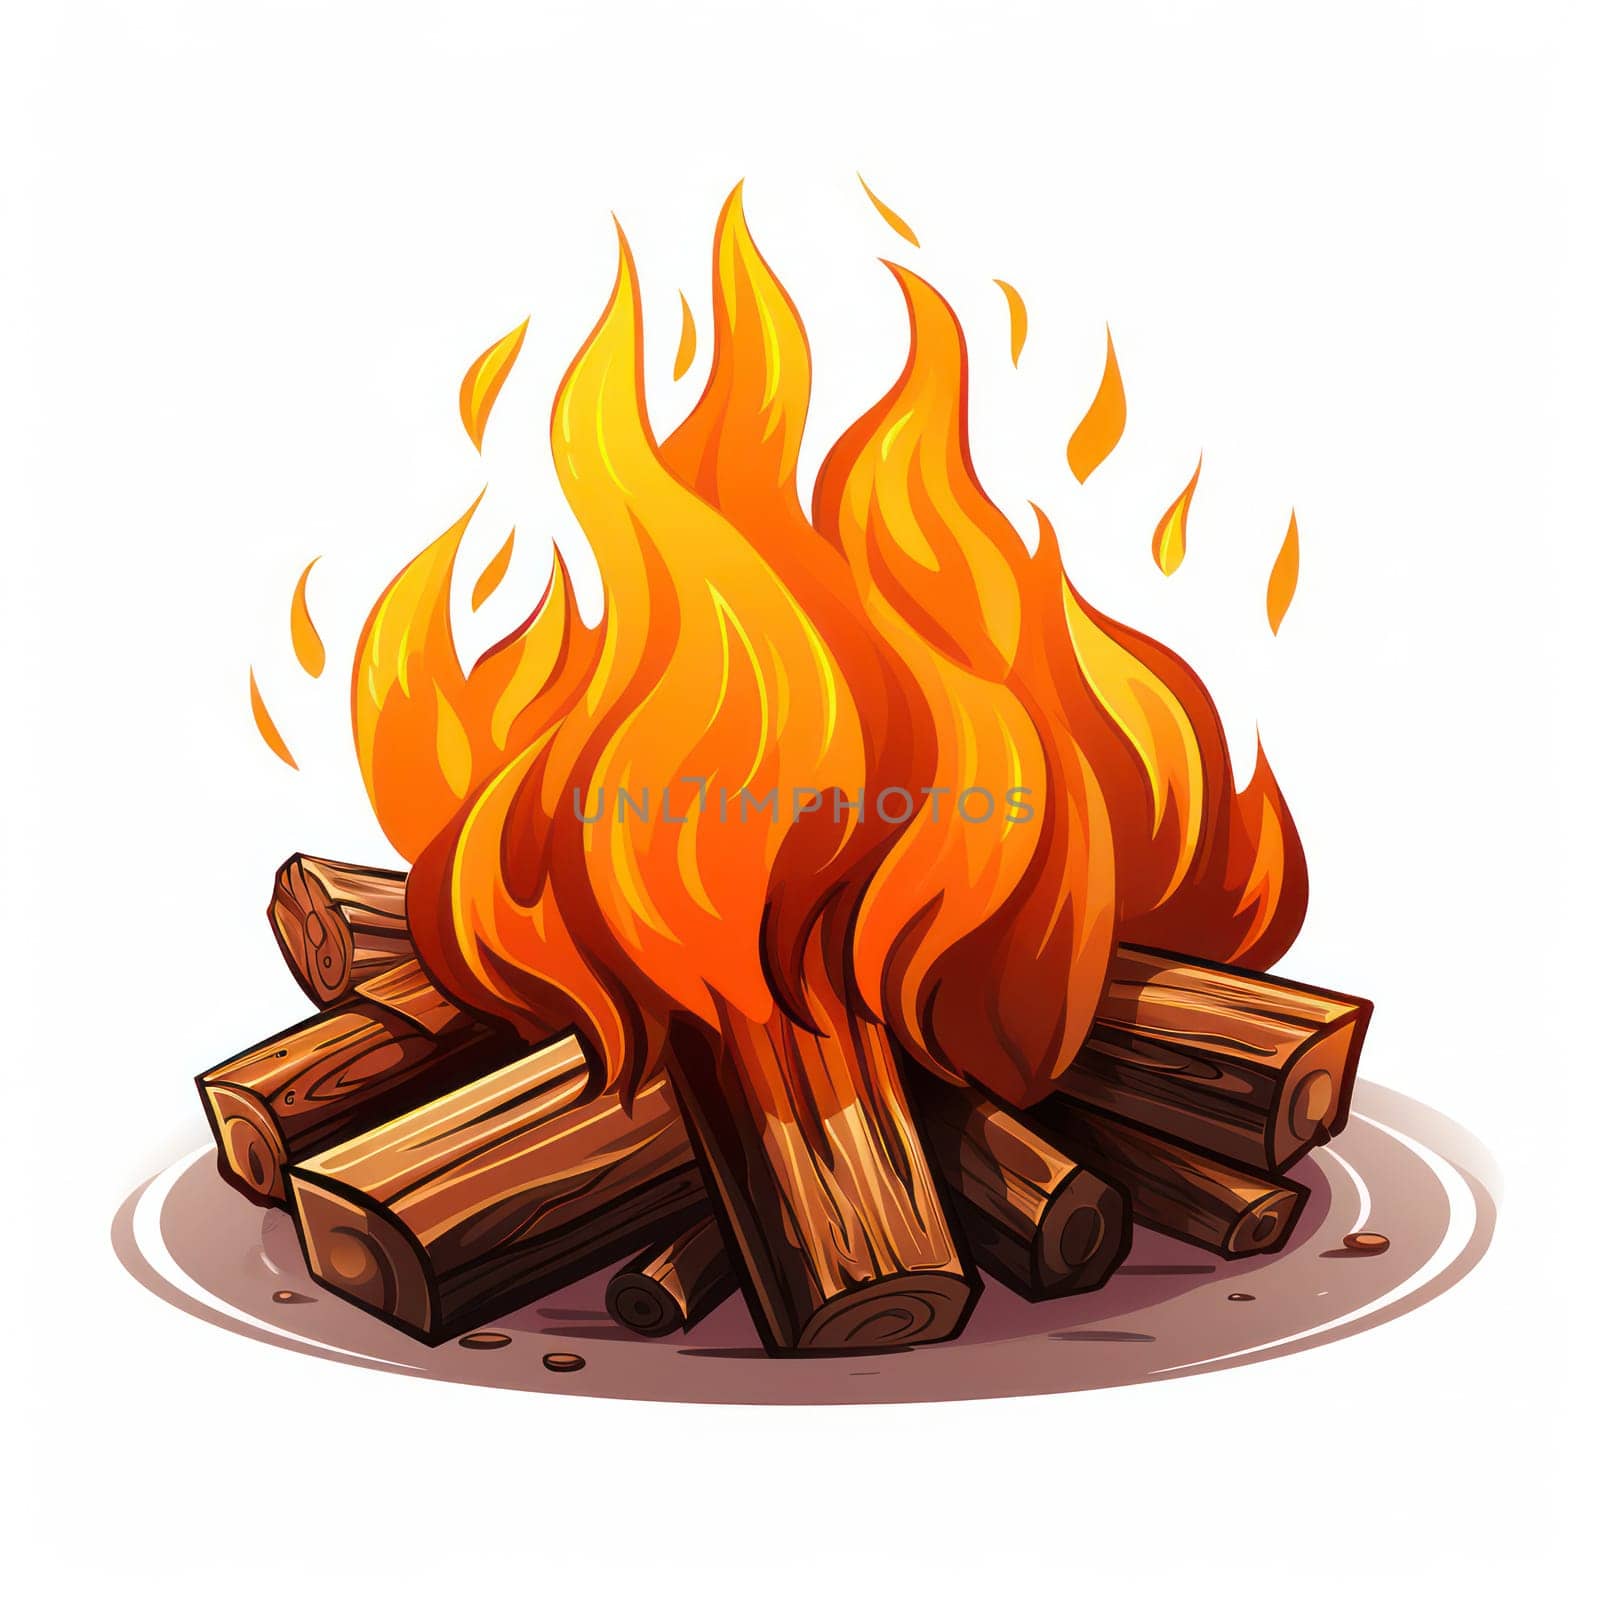 Bright Flames On Wood: A Cartoon Campfire Illustration with Warmth and Adventure under the Night Sky